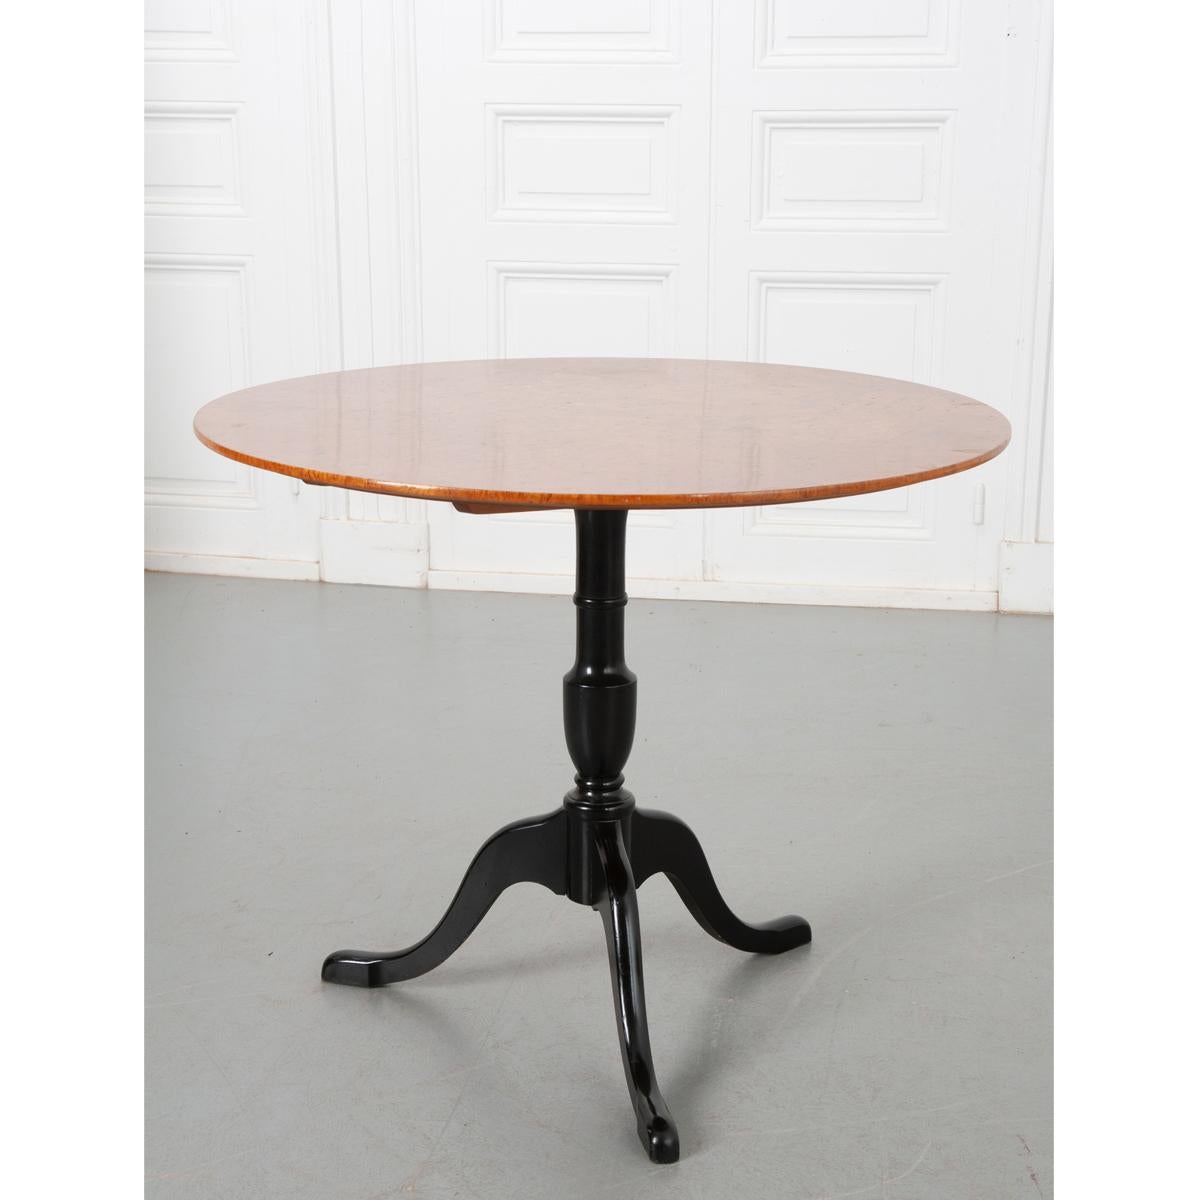 Swedish Early 20th Century Birch Tilt Top Table   In Good Condition For Sale In Baton Rouge, LA